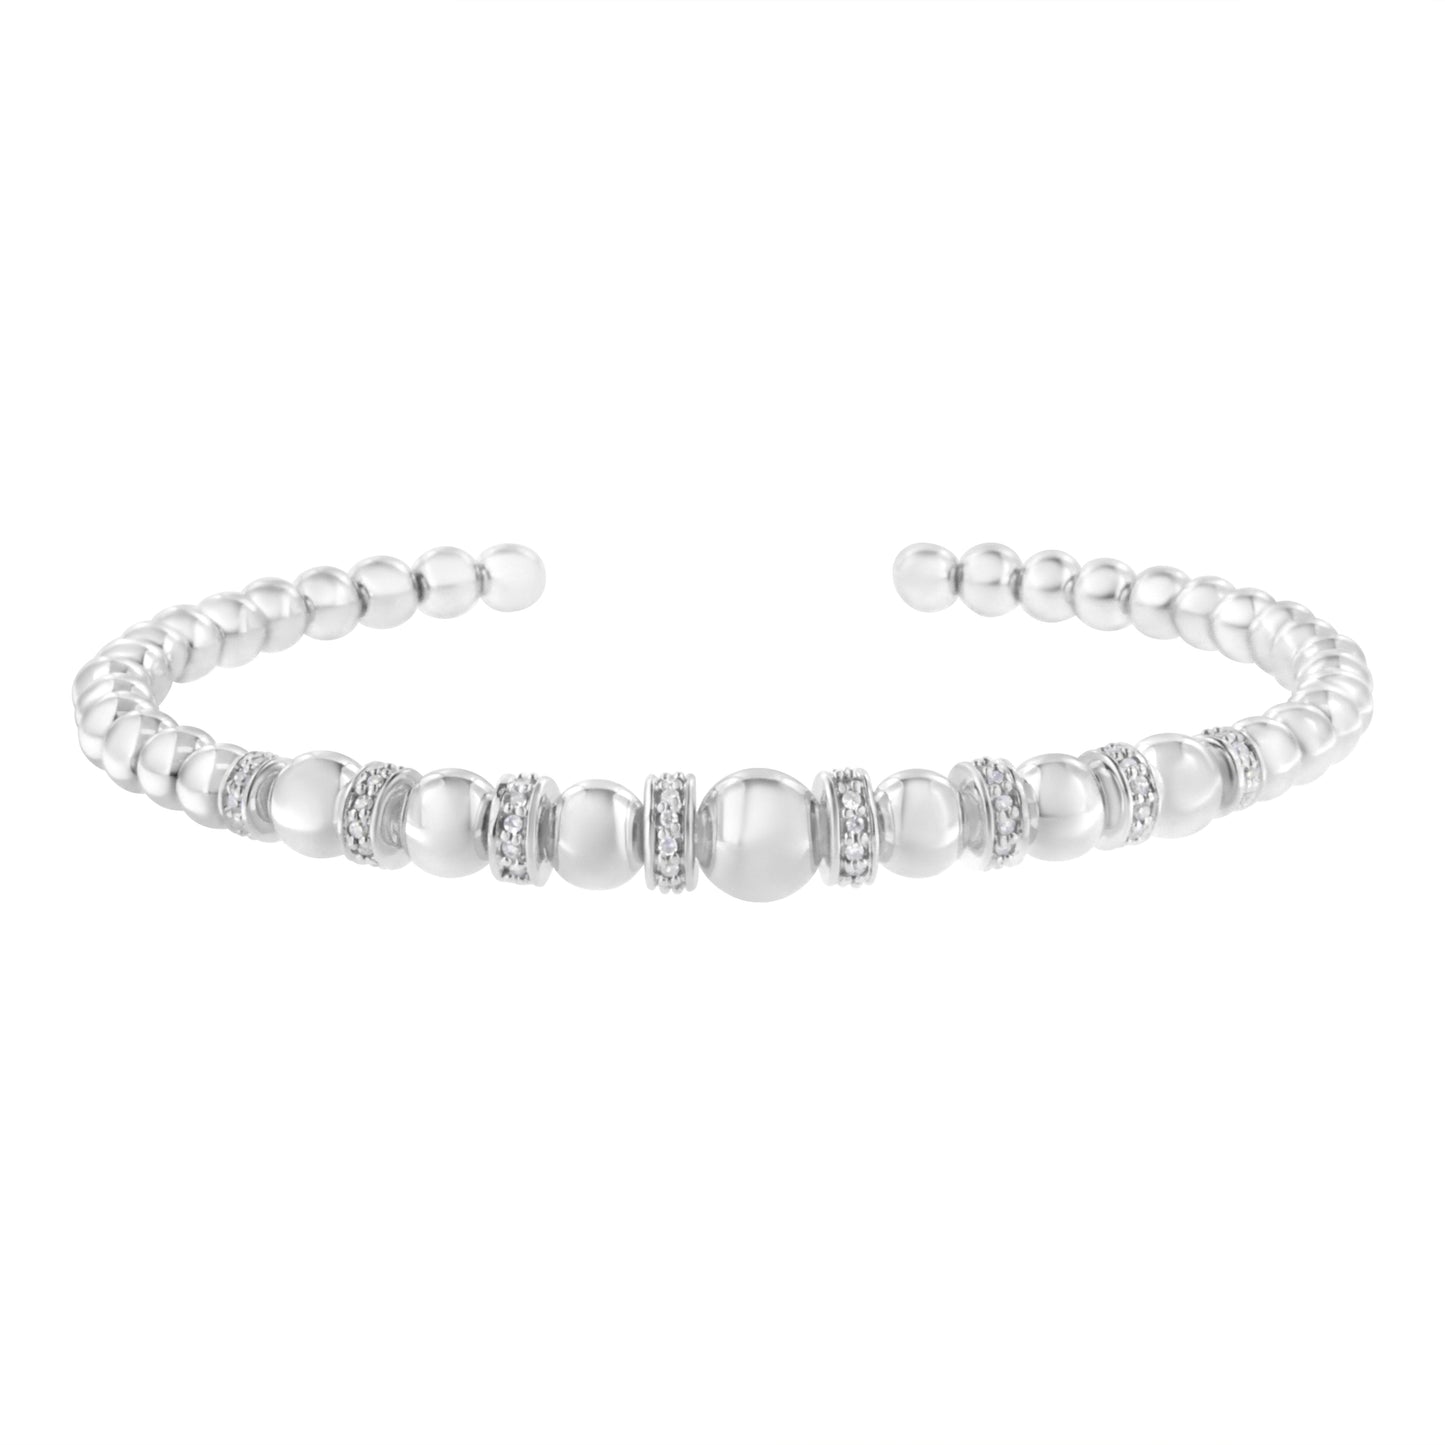 1/4 cttw Diamond Rondelle Graduated Ball Bead Cuff Bangle Bracelet in Sterling Silver